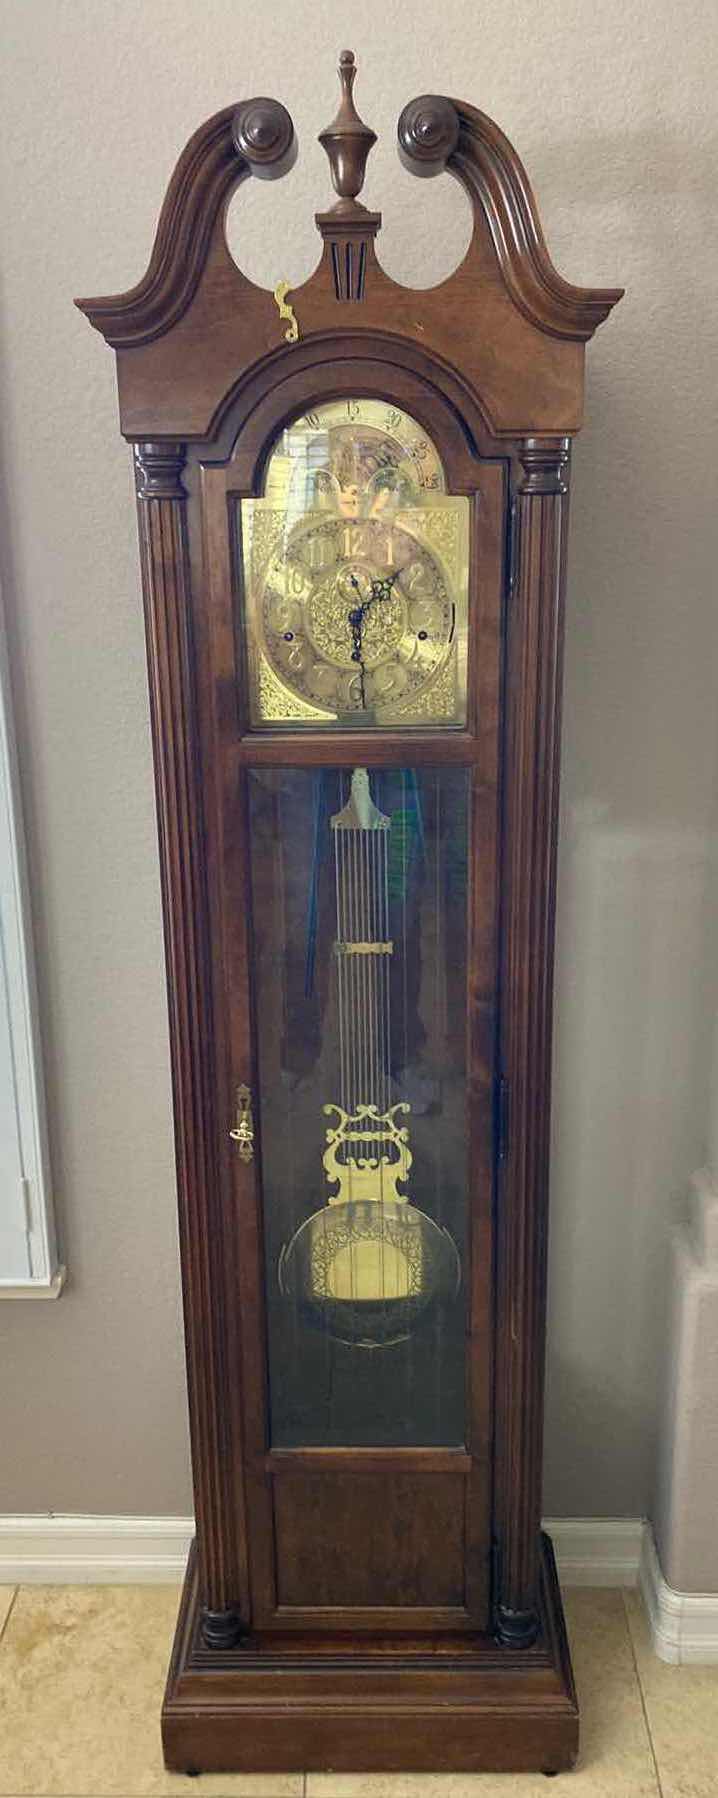 Photo 1 of HOWARD MILLER GRANDFATHER CLOCK WITH WINDER 21 1/2“ x 12 1/2“ H 79”